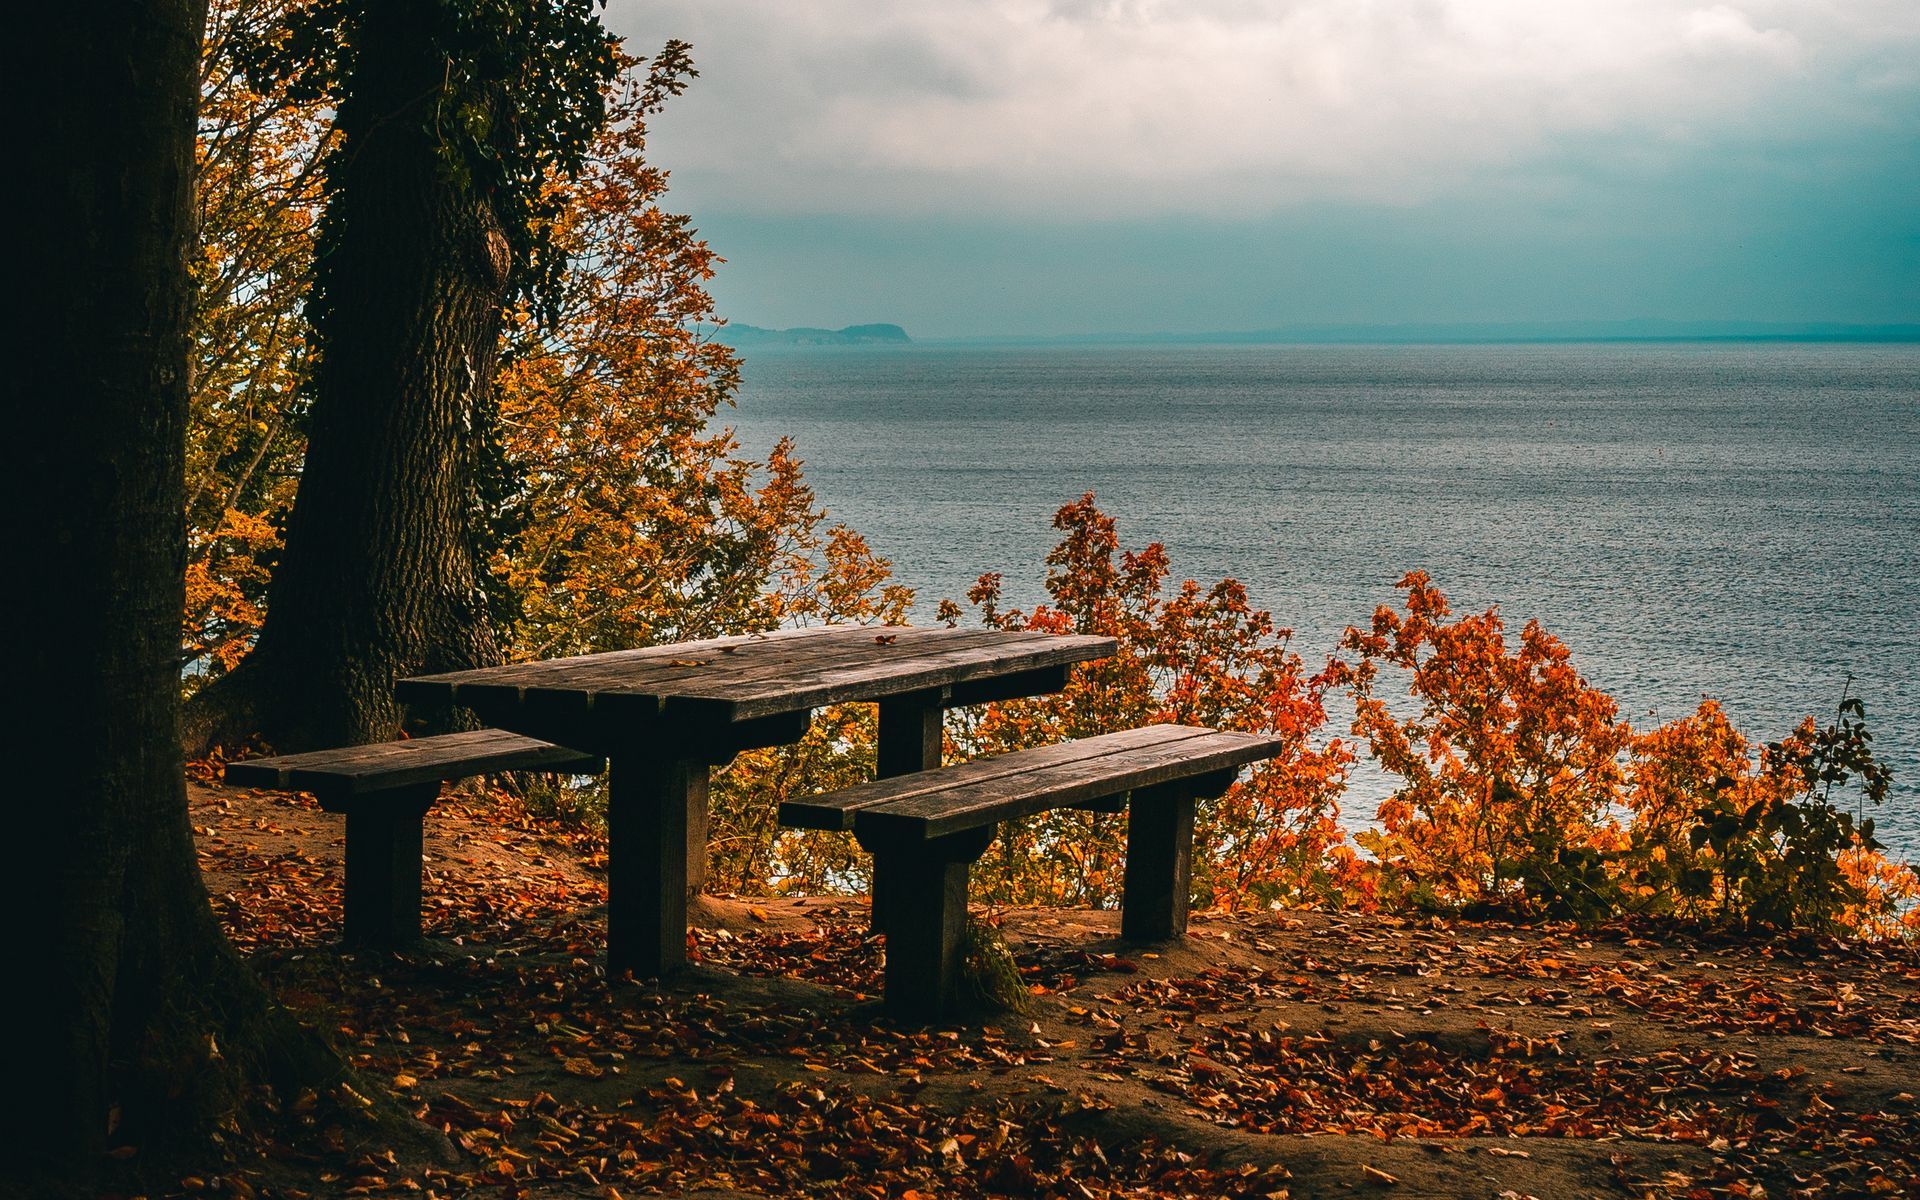 Download wallpaper 1920x1200 autumn, benches, table, sea, shore, trees, foliage widescreen 16:10 HD background